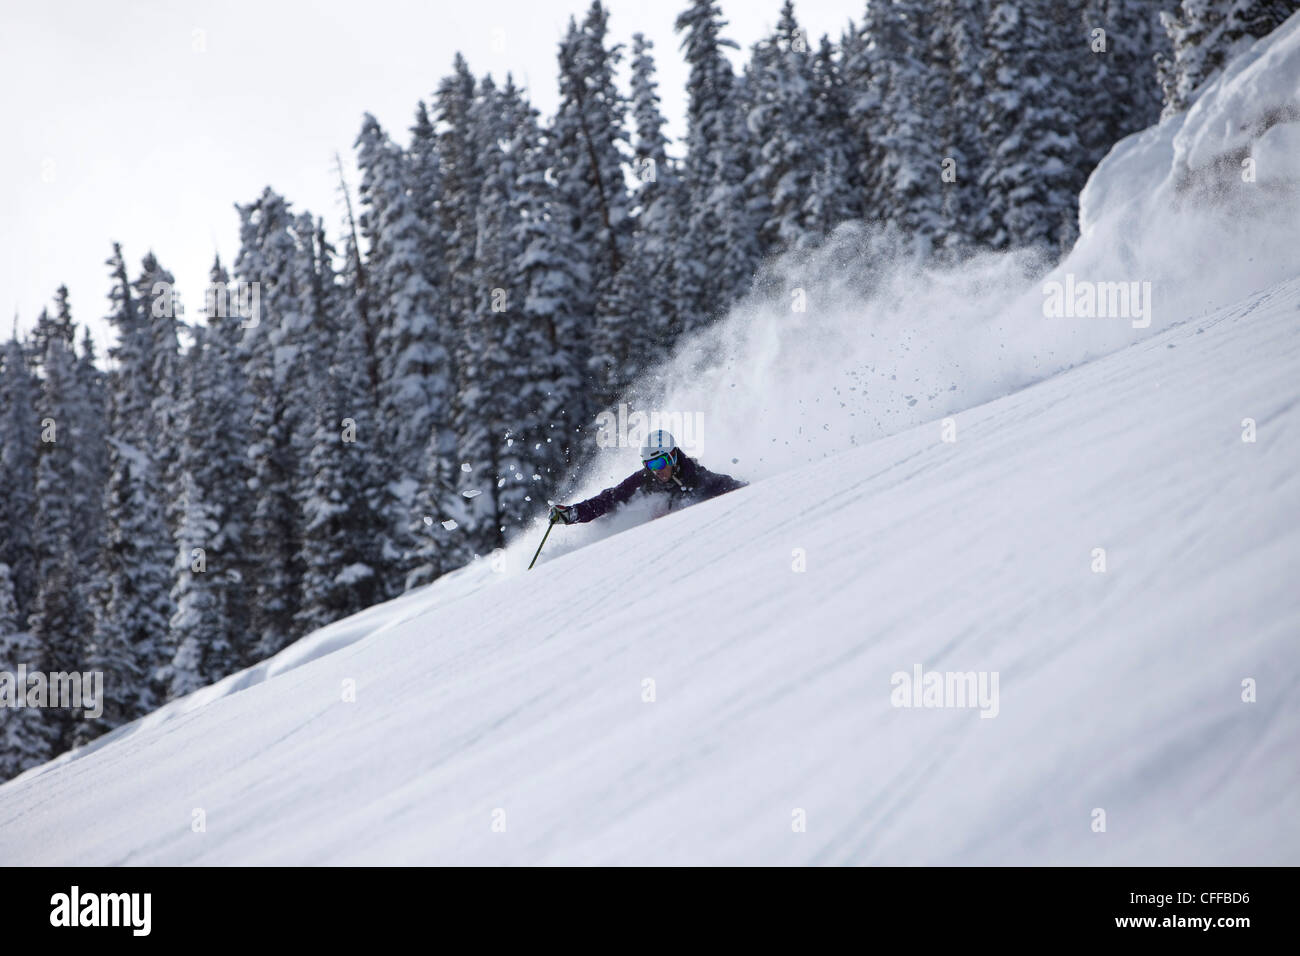 A athletic skier rips fresh deep powder turns in the backcountry on a stormy day in Colorado. Stock Photo